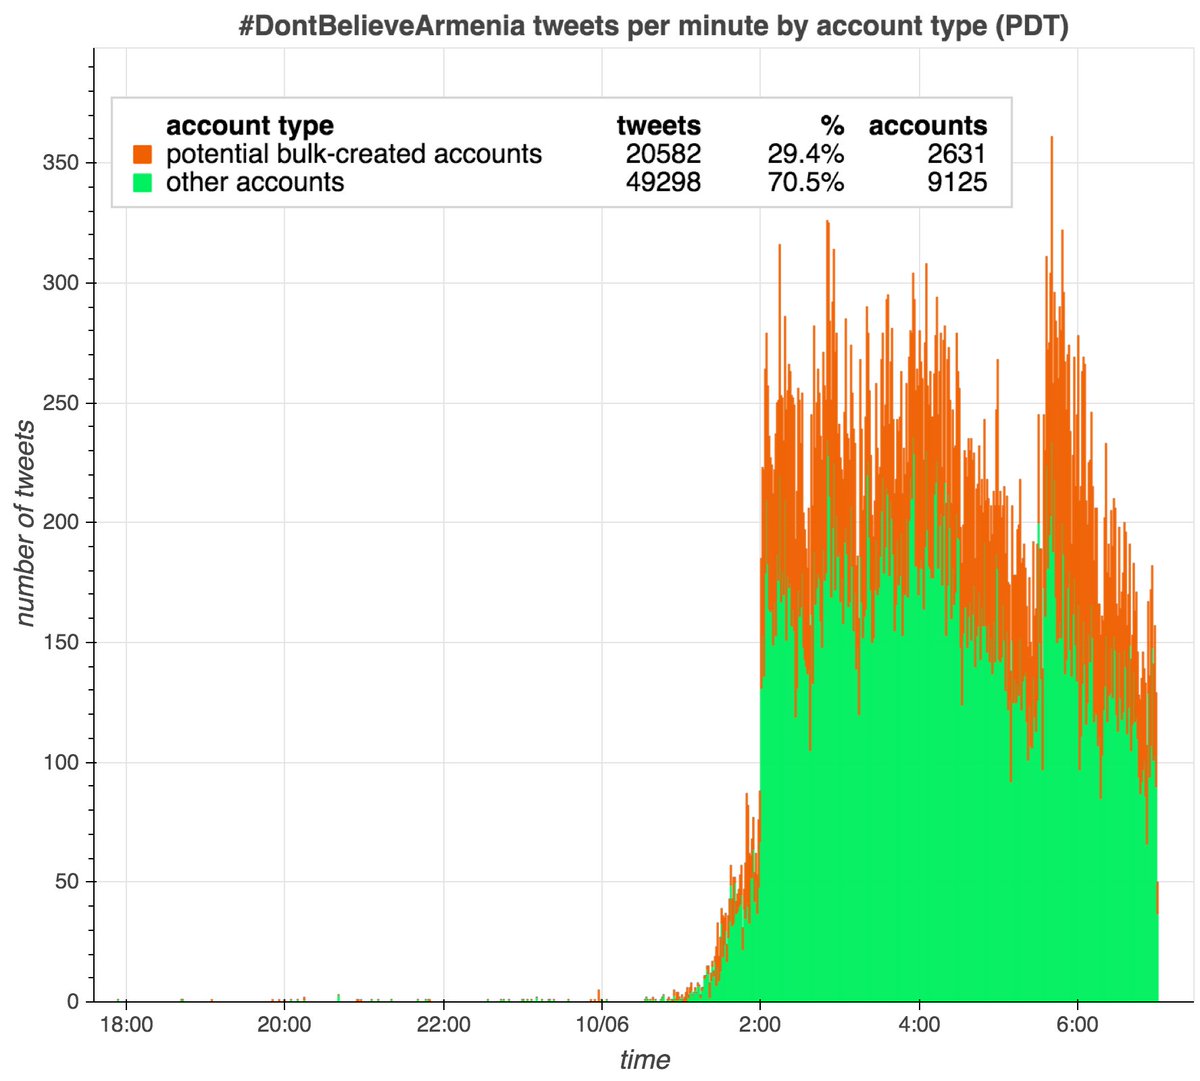 The accounts tweeting  #DontBelieveArmenia were disproportionately created in mid-July and early October 2020, corresponding to military clashes between Armenia and Azerbaijan. Accounts created during these spikes are responsible for 29.4% of the traffic (20582 of 69880 tweets).